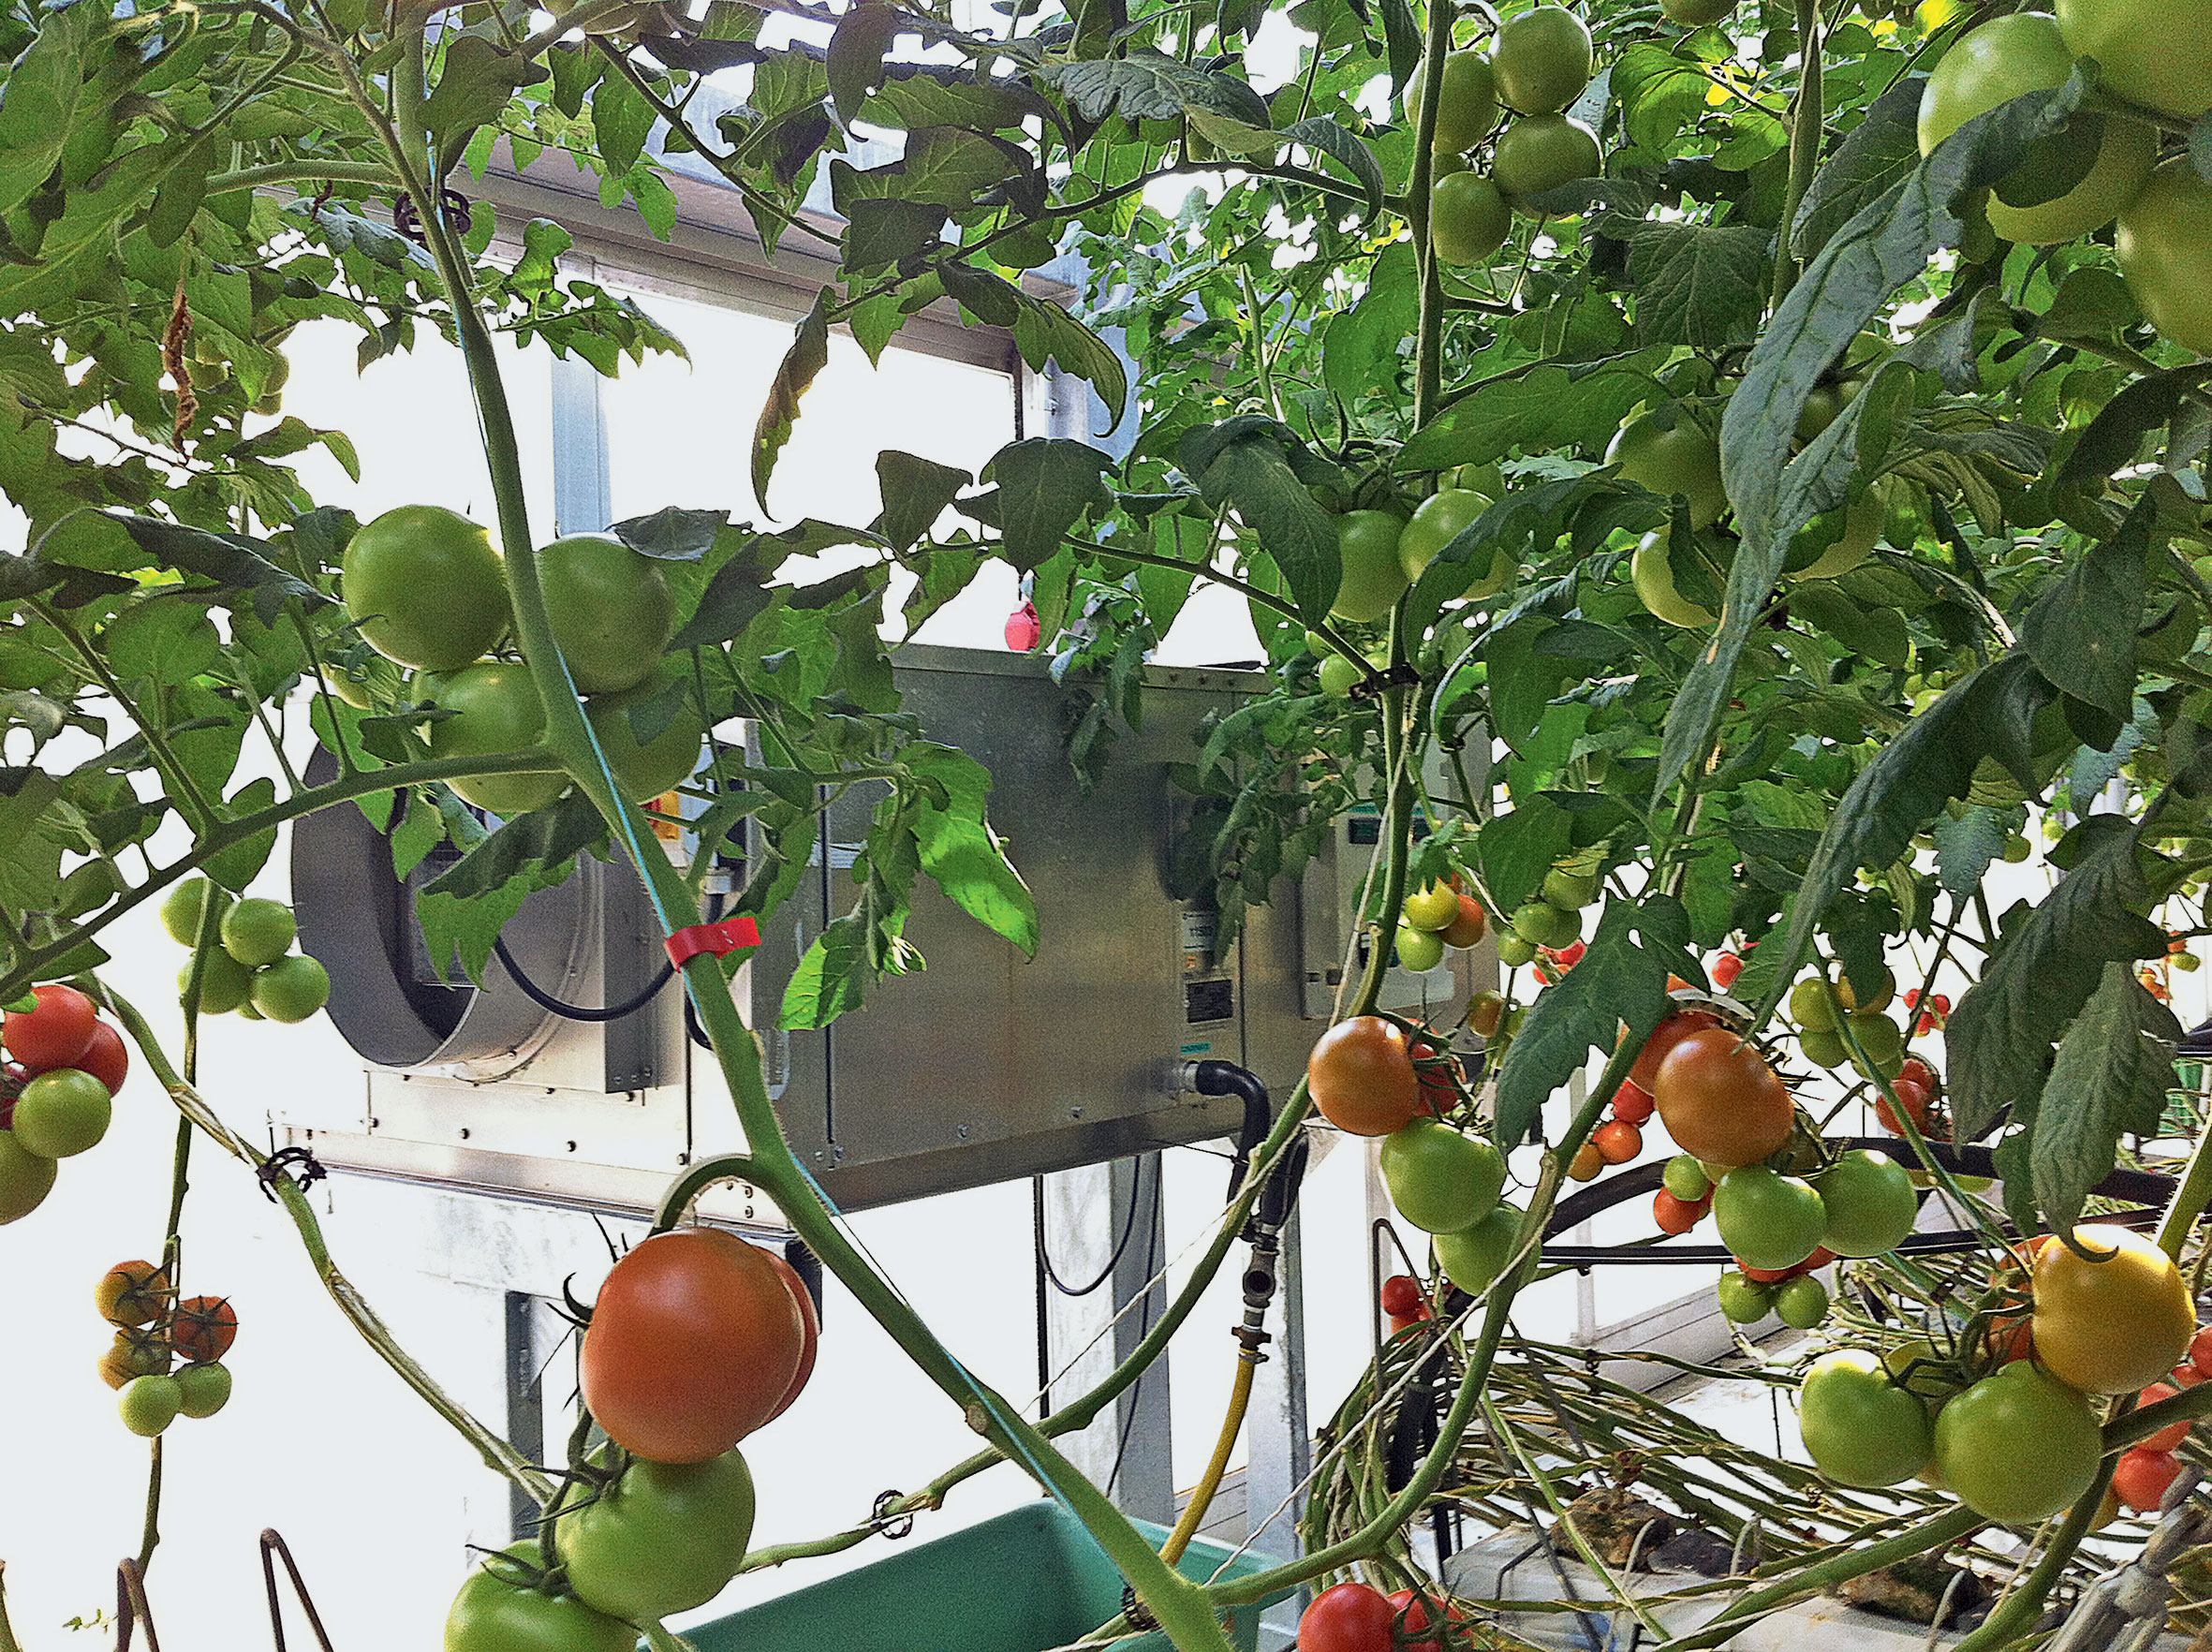 Energy saving by dehumidification by condensation in greenhouse tomato crop